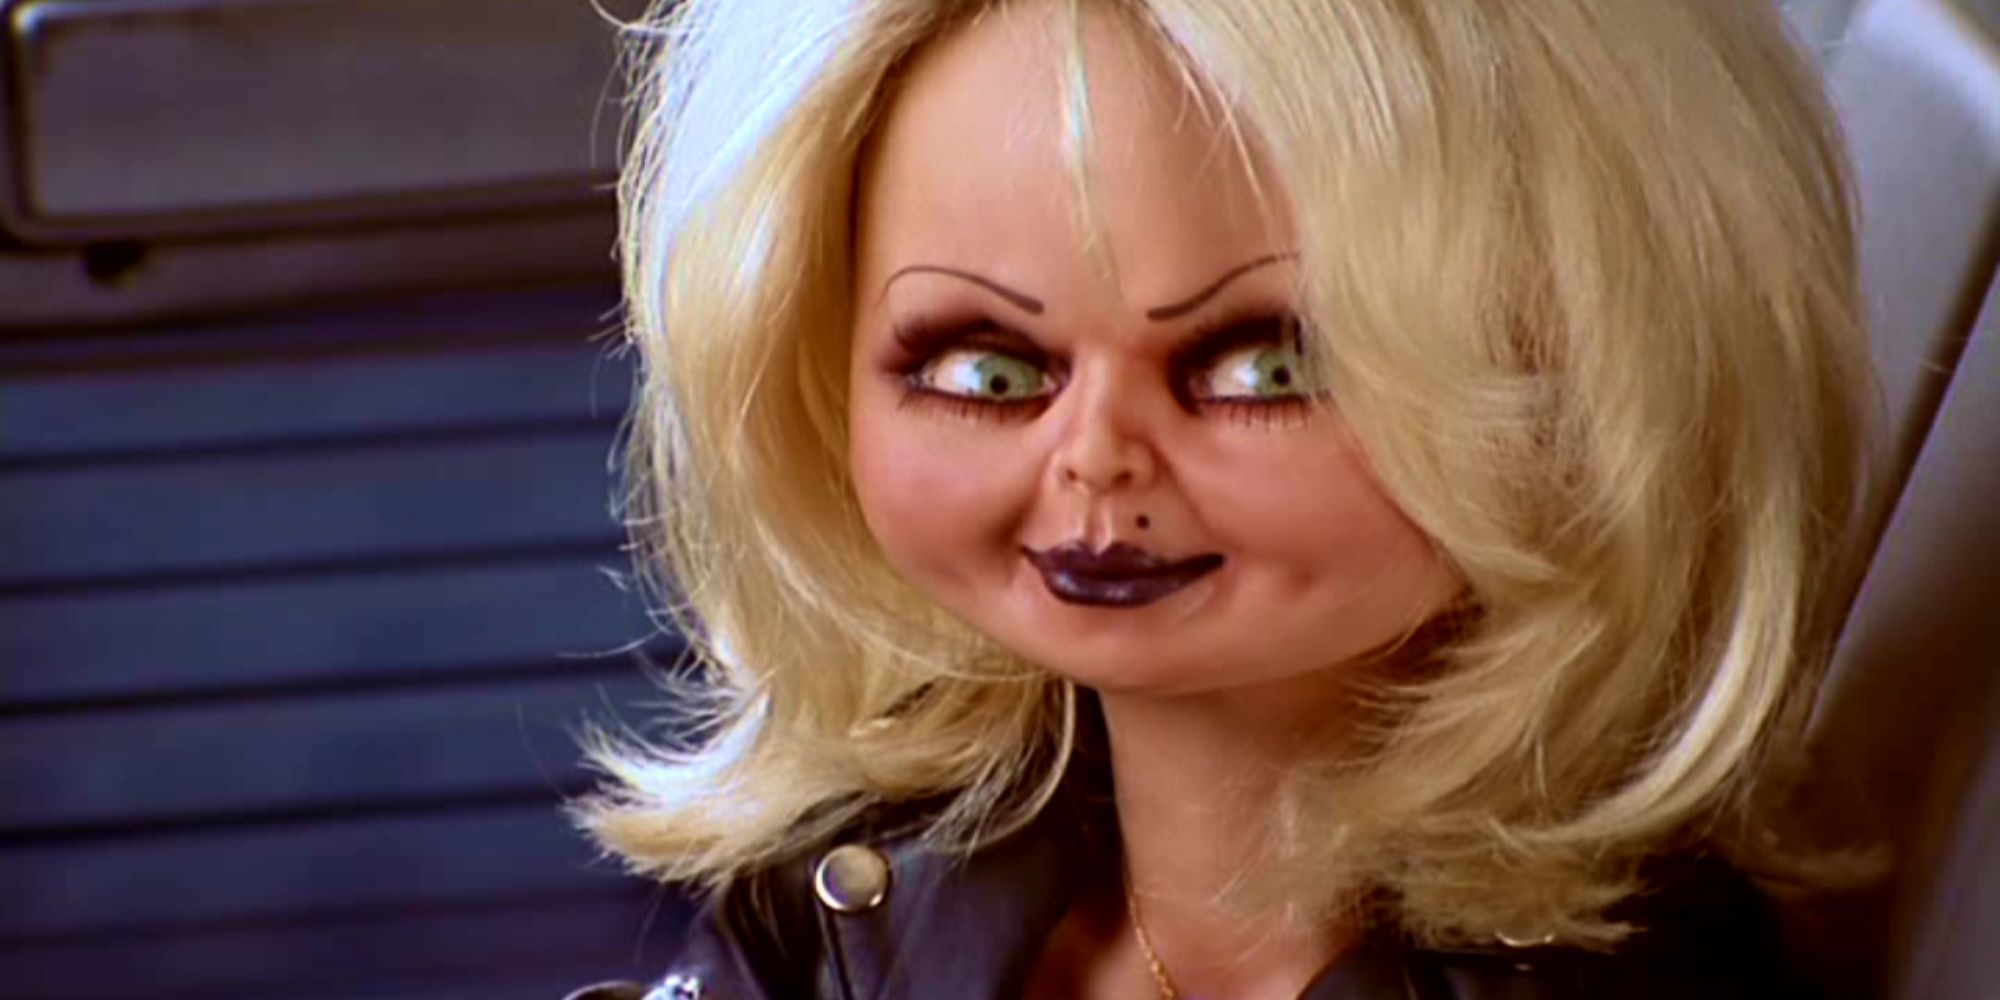 Tiffany the doll in Bride of Chucky